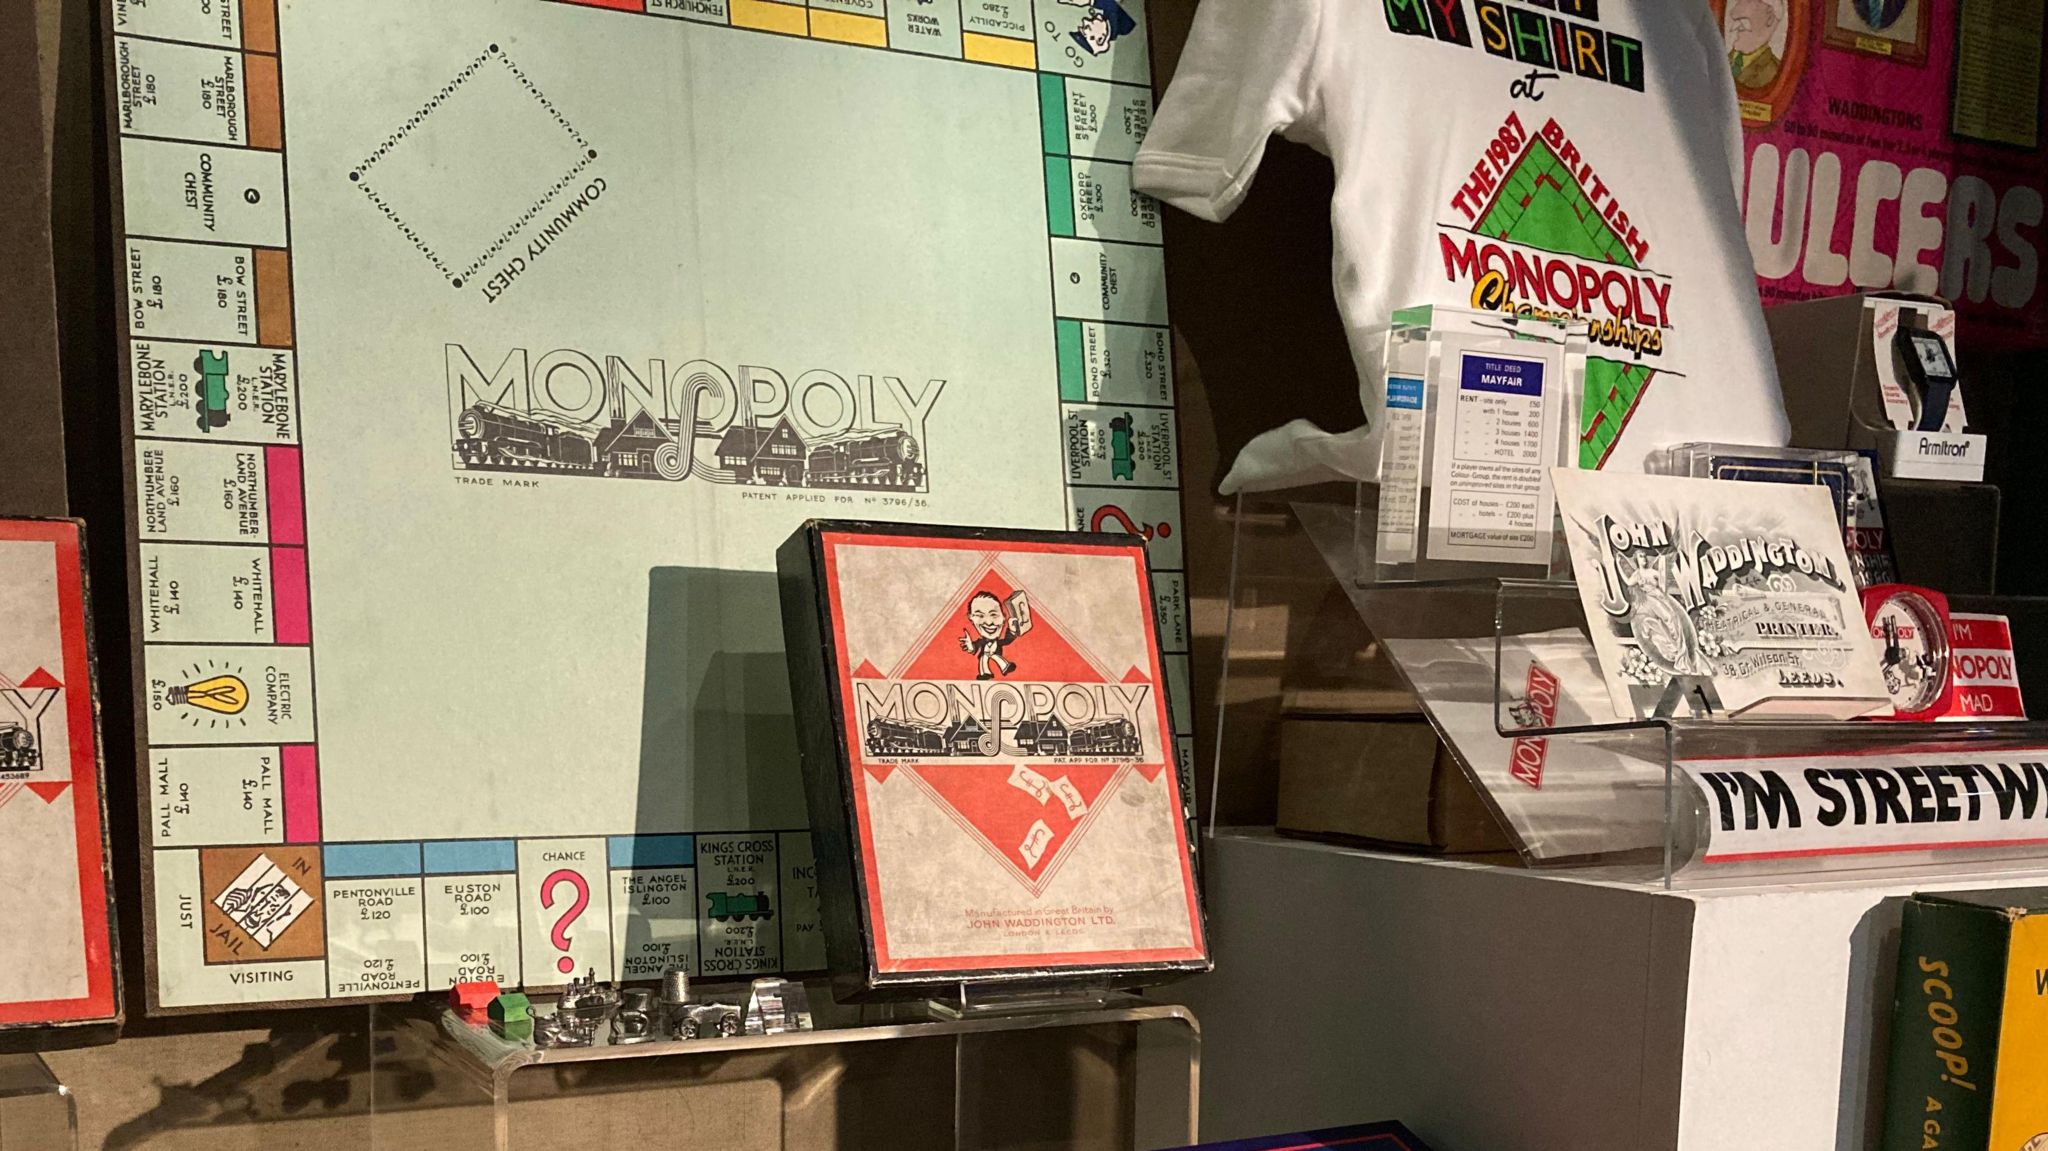 Monopoly game on display at Leeds City Museum